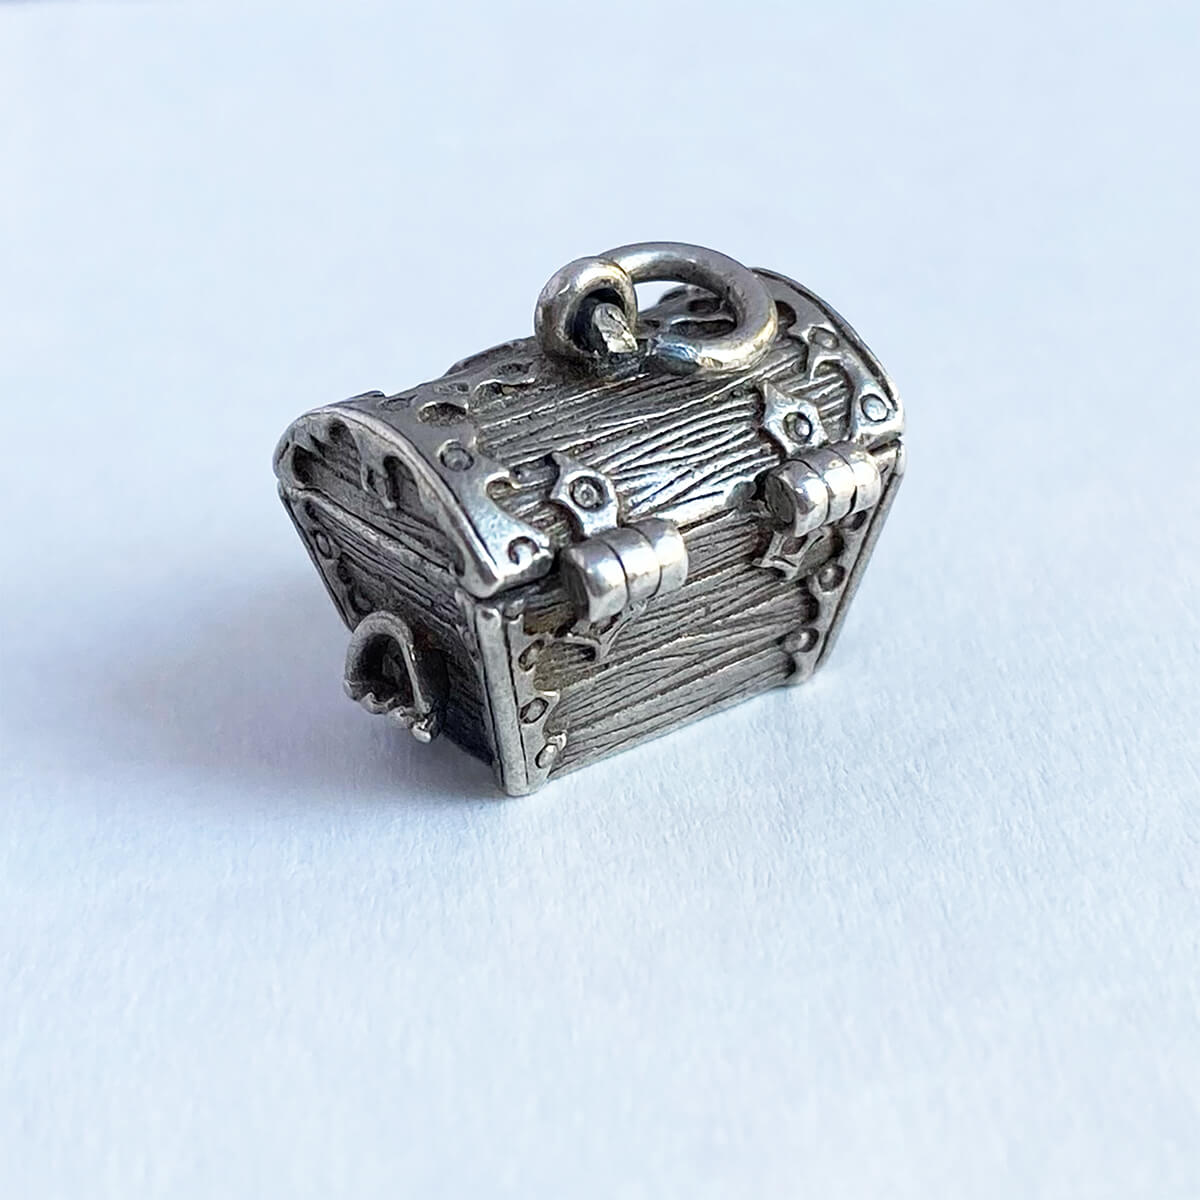 Vintage silver treasure trove charm opens to loot